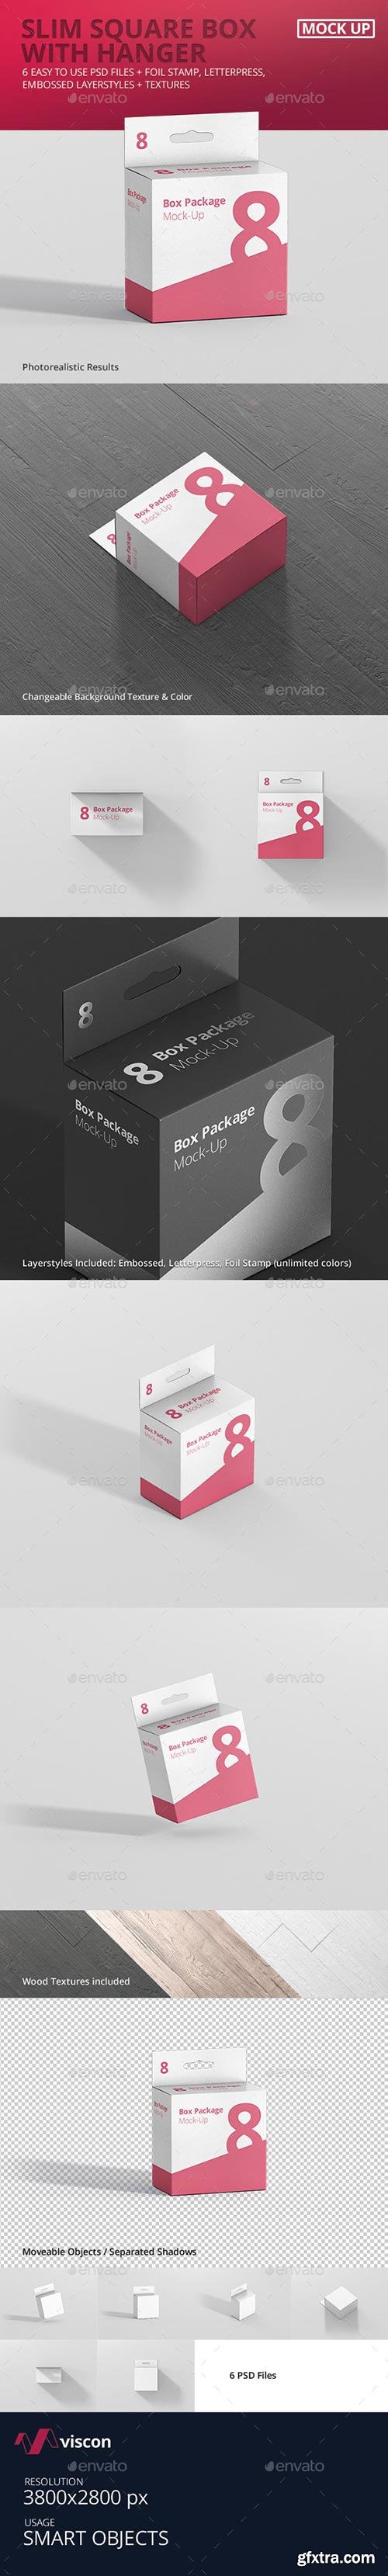 Graphicriver - Package Box Mockup - Slim Square with Hanger 18797389